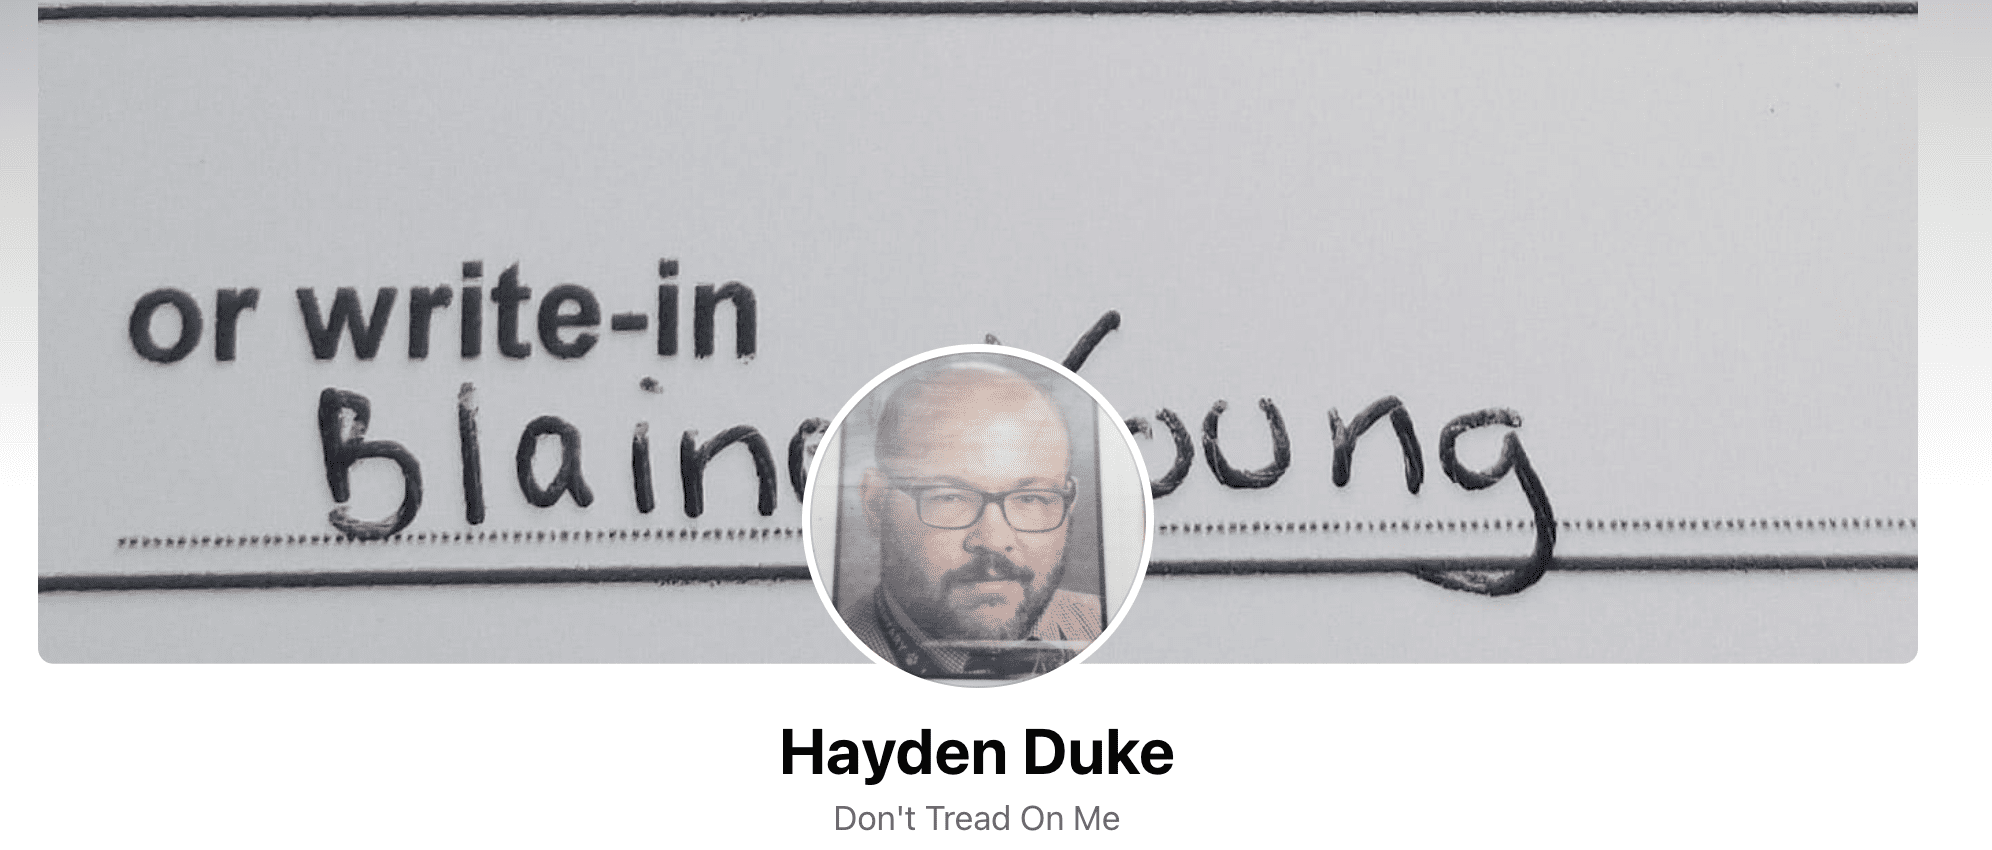 Hayden Duke is running Blaine Young's write-in campaign